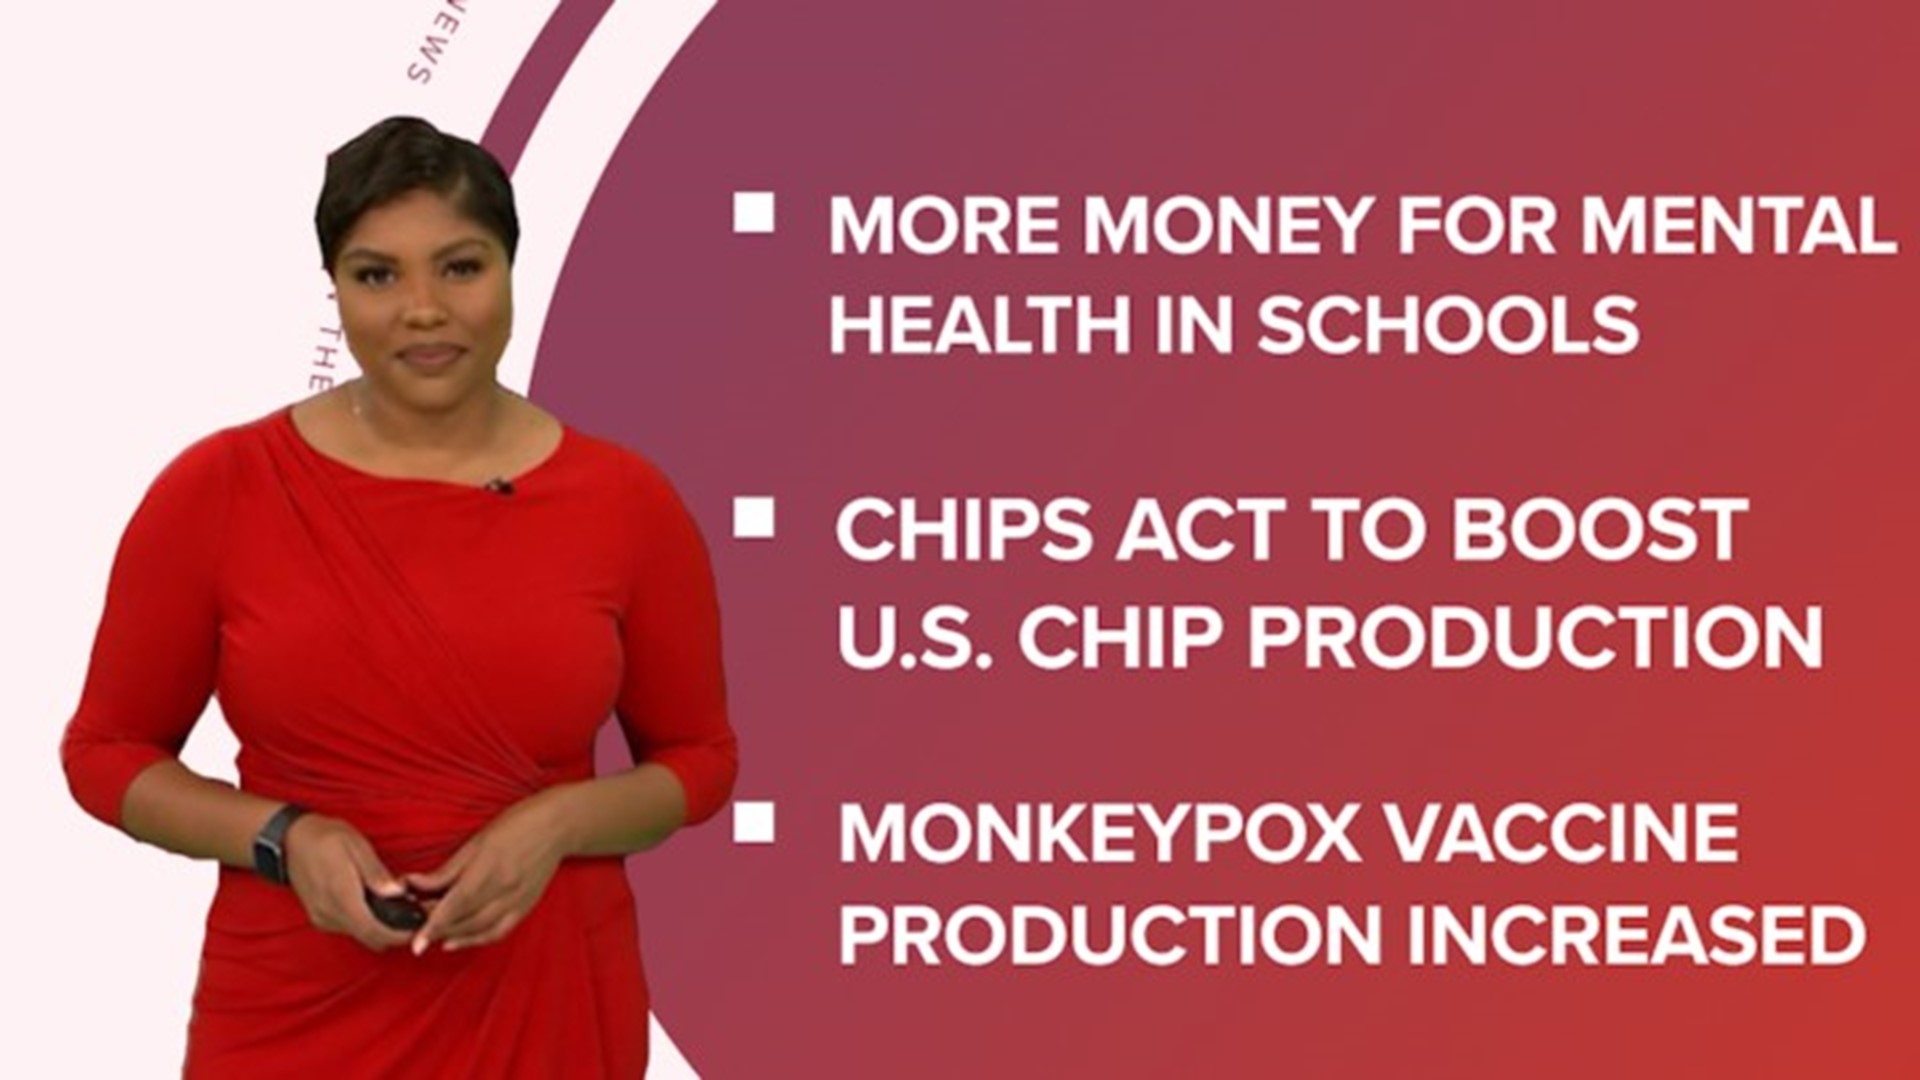 A look at what is happening across the U.S. from more mental health funding for schools to the CHIPS act passing through Congress and the $1B Mega Millions drawing.